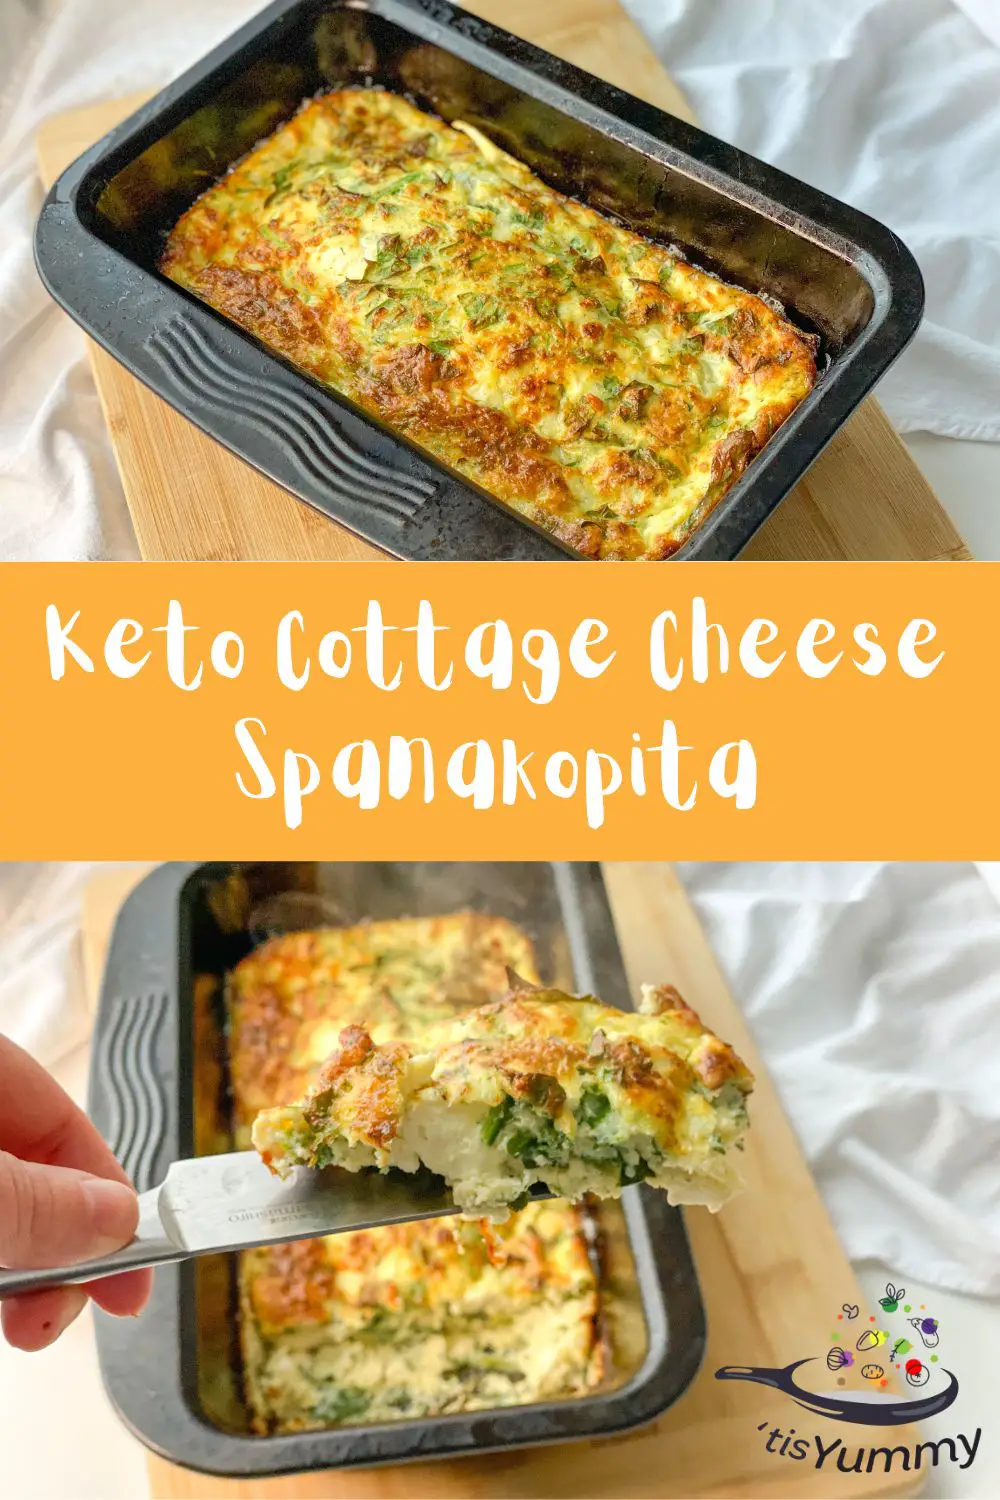 keto cottage cheese spanakopita double image in pan and a slice on a knife